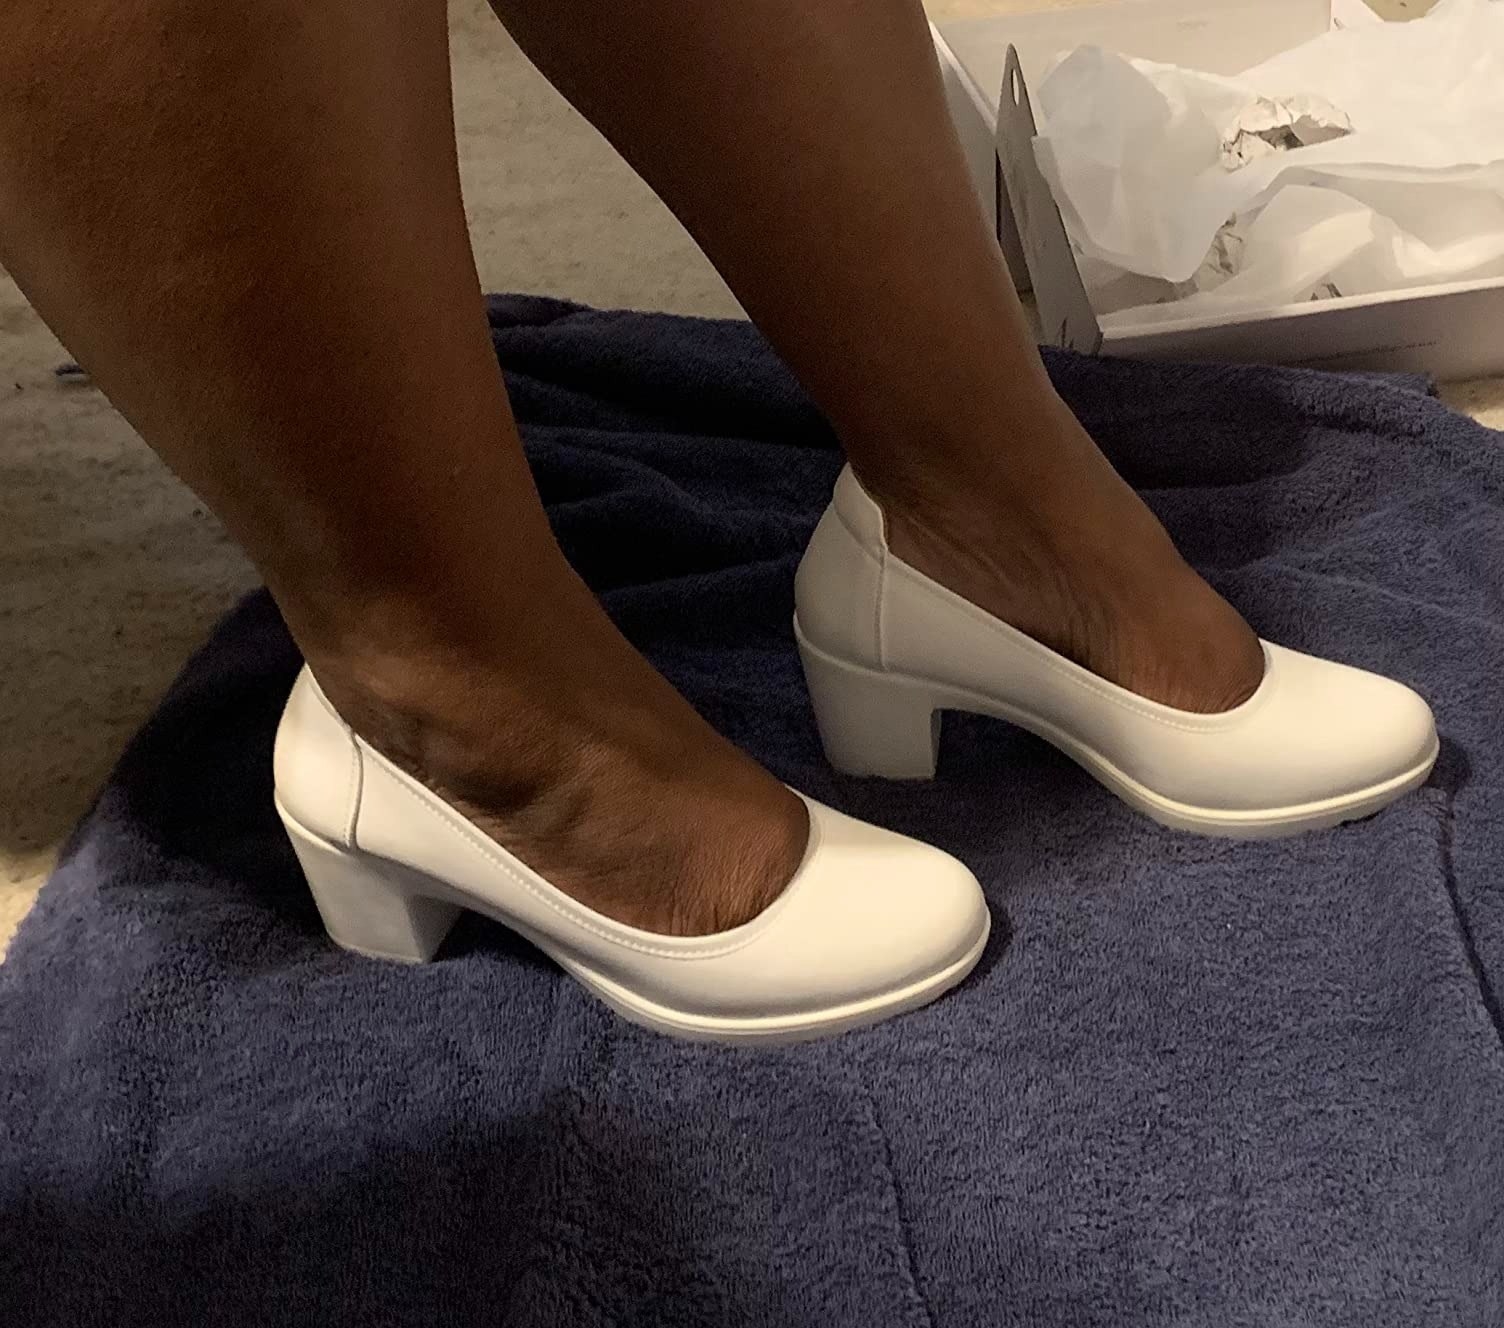 A reviewer wearing the white heels